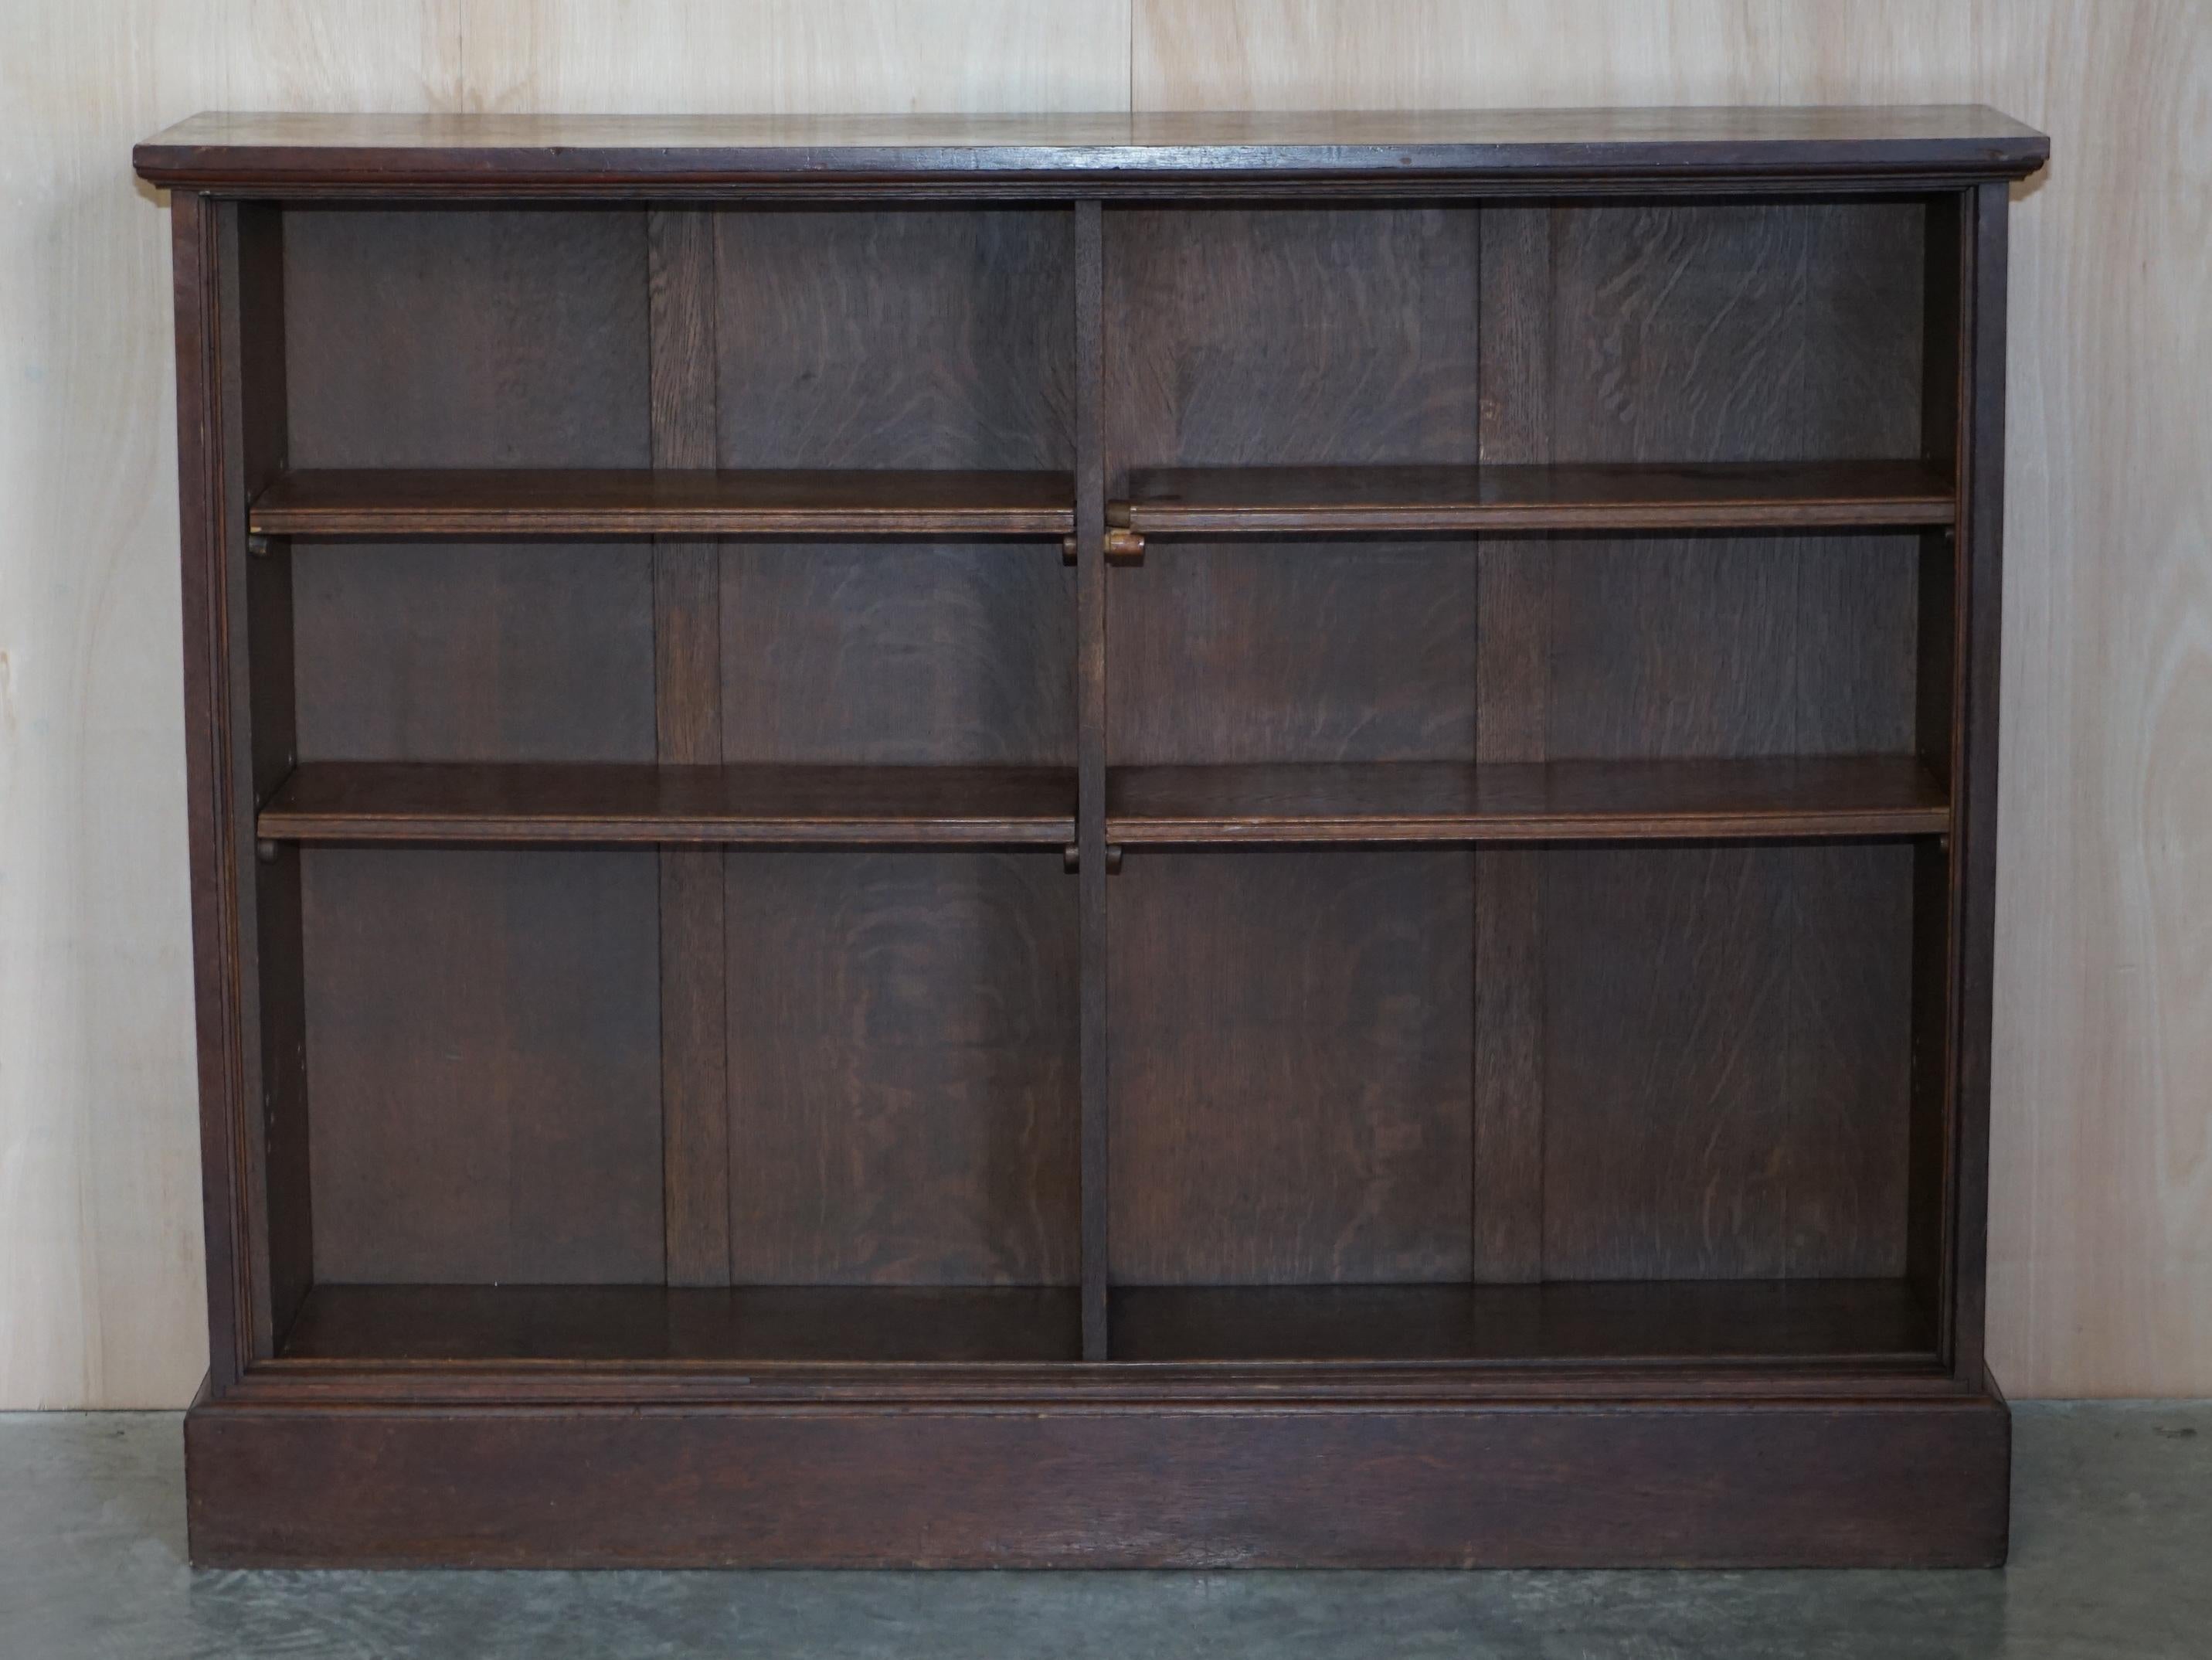 We are delighted to offer for sale 1 of 2 large dwarf open library bookcases circa 1880 in English oak

As mentioned this is one of two, the other is 60cm wider than this one and is listed under my other items, it is not included in this